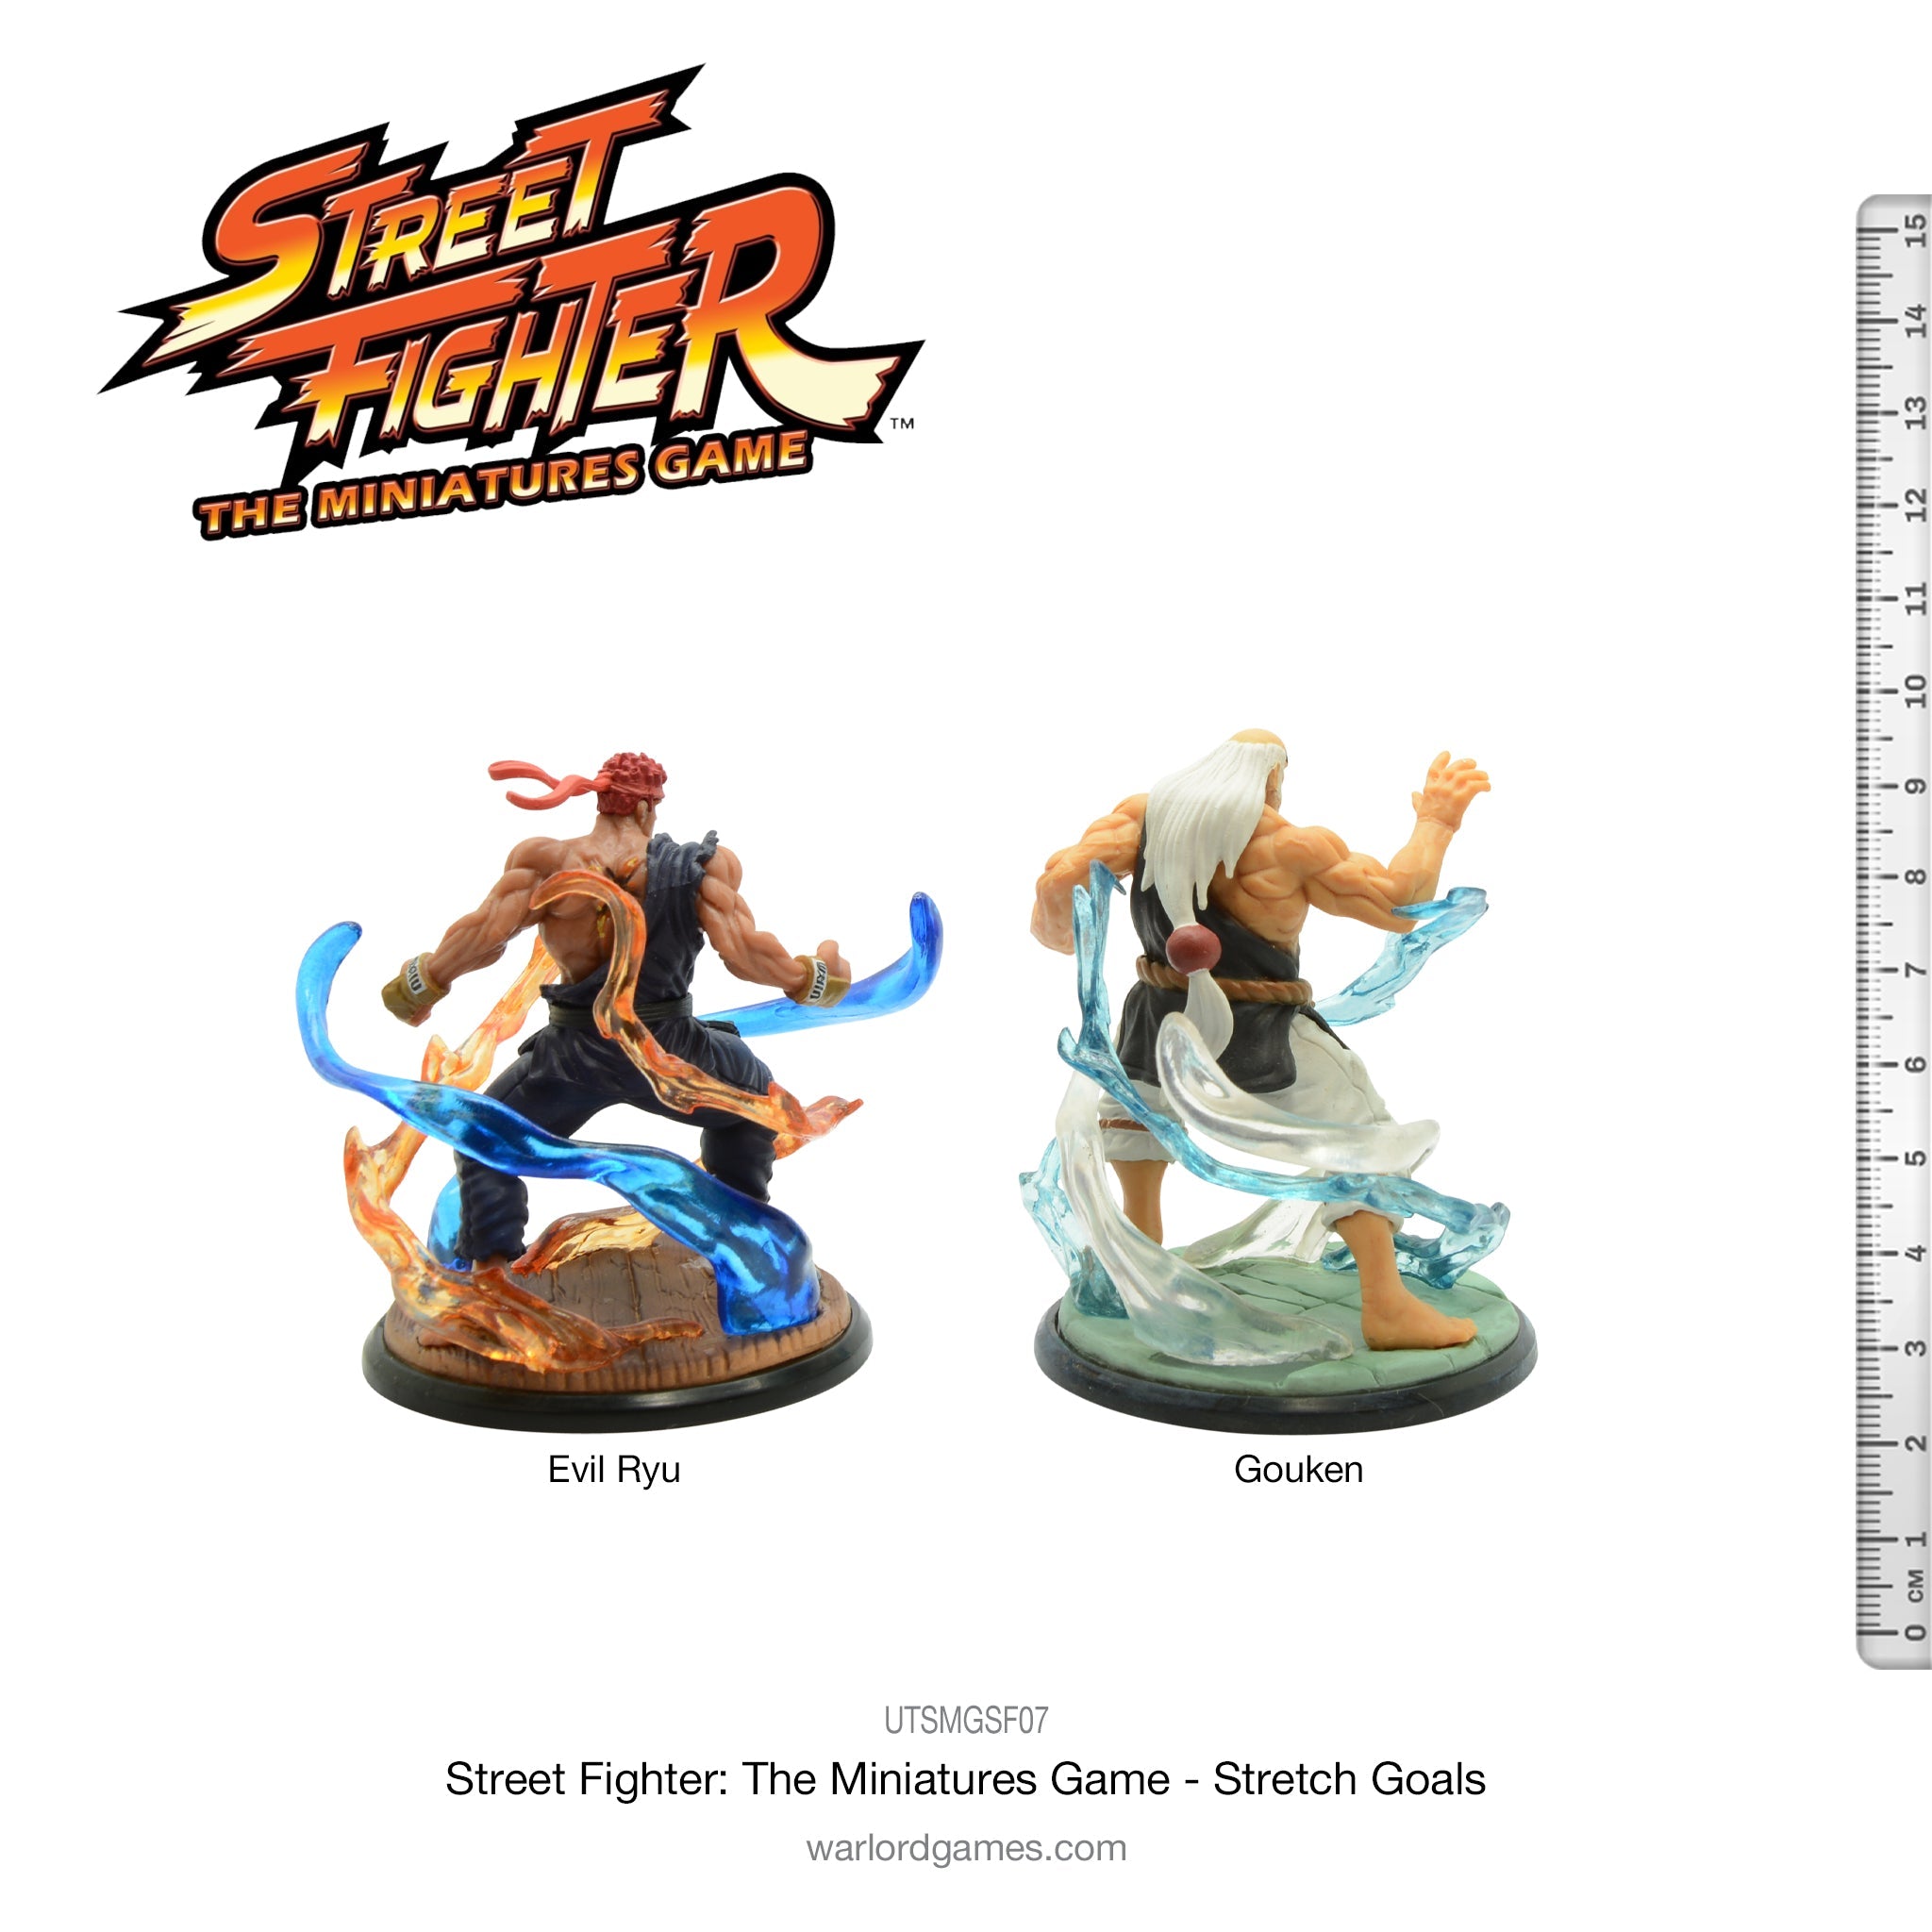 Street Fighter: The Miniatures Game - Stretch Goals